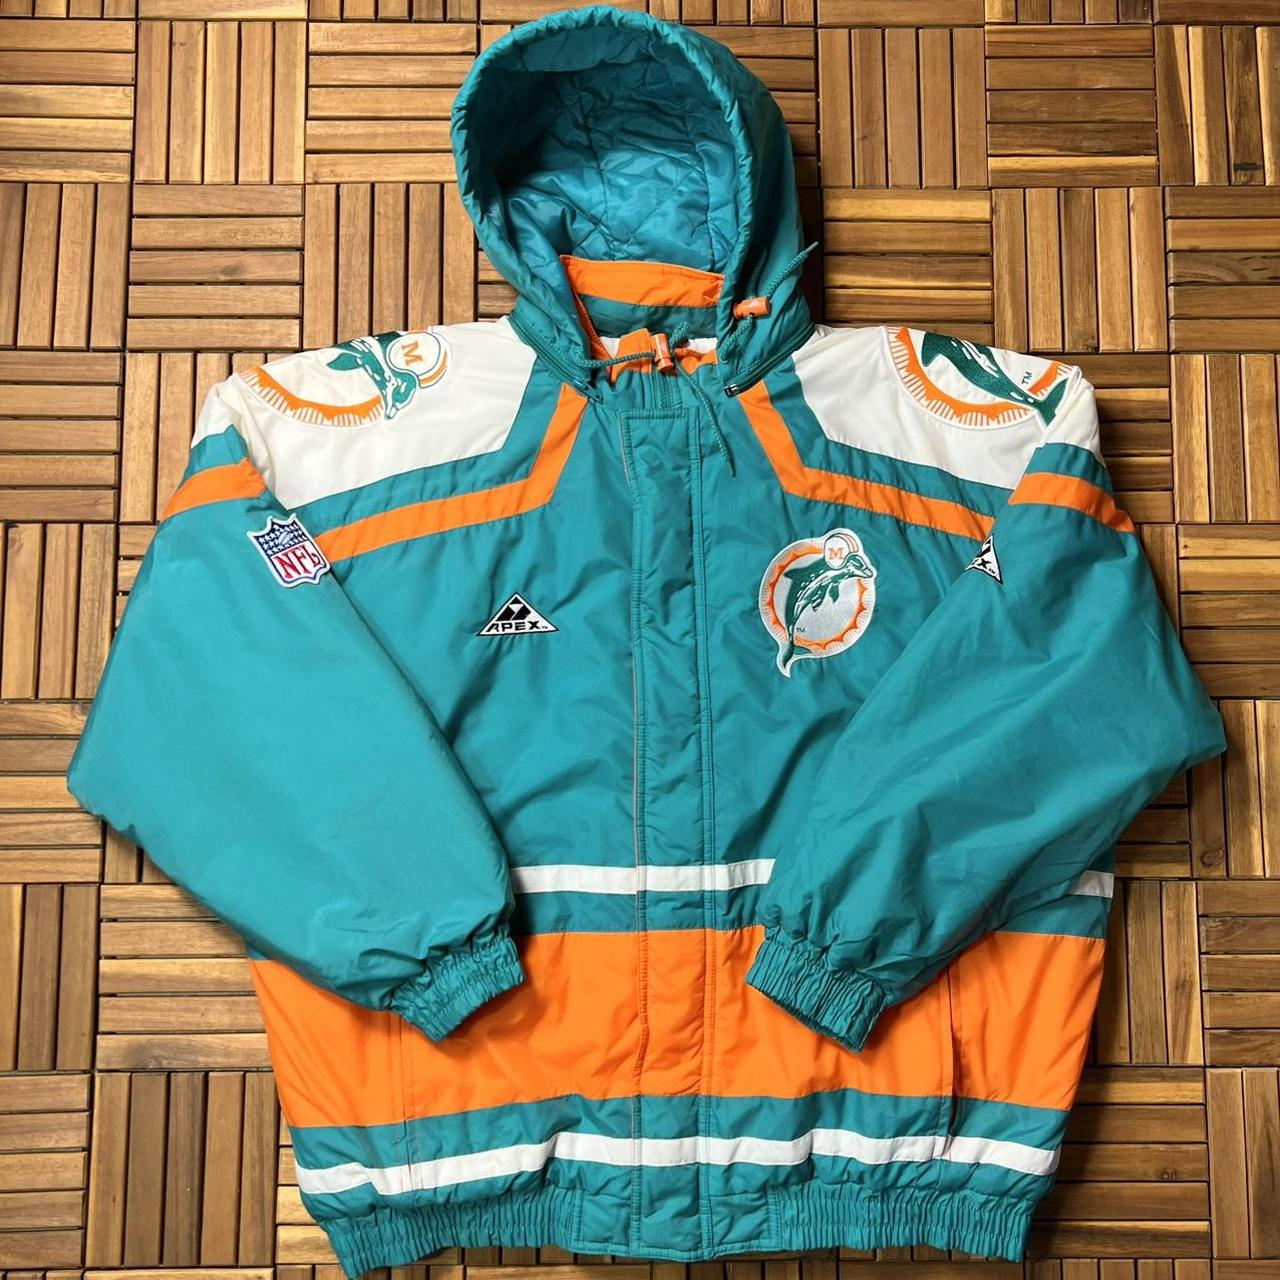 miami dolphins jackets for sale